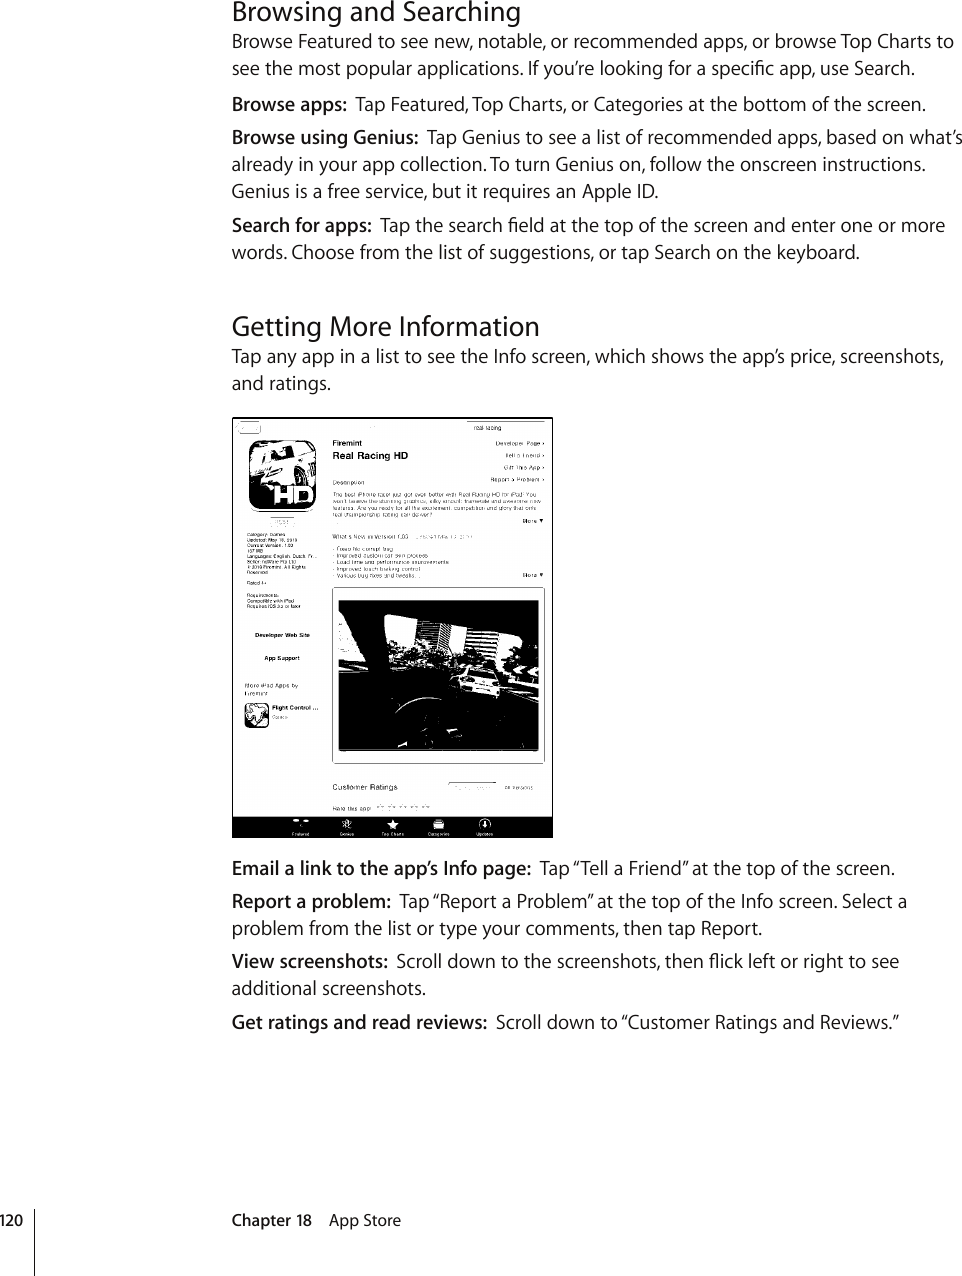 Browsing and SearchingBrowse Featured to see new, notable, or recommended apps, or browse Top Charts to UGGVJGOQUVRQRWNCTCRRNKECVKQPU+H[QW¨TGNQQMKPIHQTCURGEK°ECRRWUG5GCTEJBrowse apps:  Tap Featured, Top Charts, or Categories at the bottom of the screen.Browse using Genius:  Tap Genius to see a list of recommended apps, based on what’s already in your app collection. To turn Genius on, follow the onscreen instructions. Genius is a free service, but it requires an Apple ID. Search for apps:  6CRVJGUGCTEJ°GNFCVVJGVQRQHVJGUETGGPCPFGPVGTQPGQTOQTGwords. Choose from the list of suggestions, or tap Search on the keyboard.Getting More InformationTap any app in a list to see the Info screen, which shows the app’s price, screenshots, and ratings.Email a link to the app’s Info page:  Tap “Tell a Friend” at the top of the screen.Report a problem:  Tap “Report a Problem” at the top of the Info screen. Select a problem from the list or type your comments, then tap Report.View screenshots:  5ETQNNFQYPVQVJGUETGGPUJQVUVJGP±KEMNGHVQTTKIJVVQUGGadditional screenshots. Get ratings and read reviews:  Scroll down to “Customer Ratings and Reviews.” 120 Chapter 18    App Store